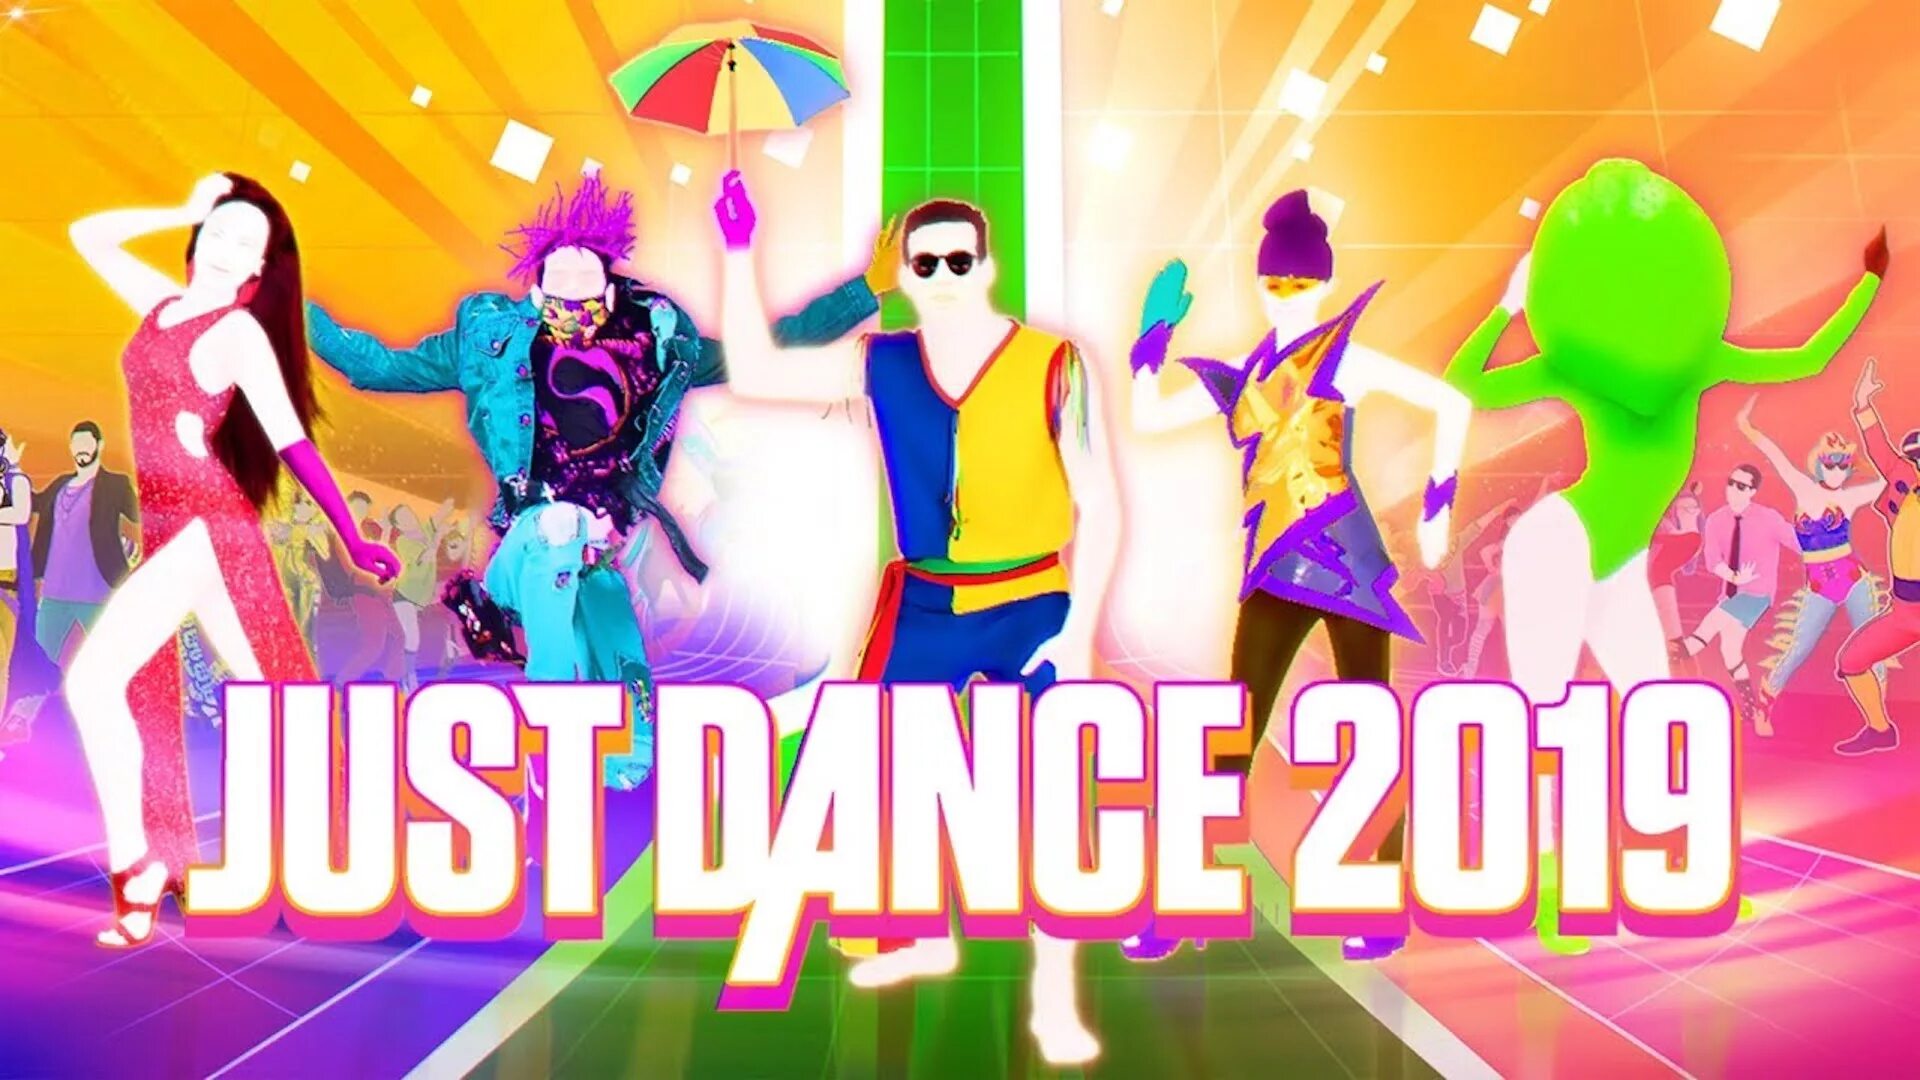 Just event. Just Dance 2019 Xbox 360. Джаст дэнс 2019. Just Dance игра 2019. Just Dance 2019 (ps4).